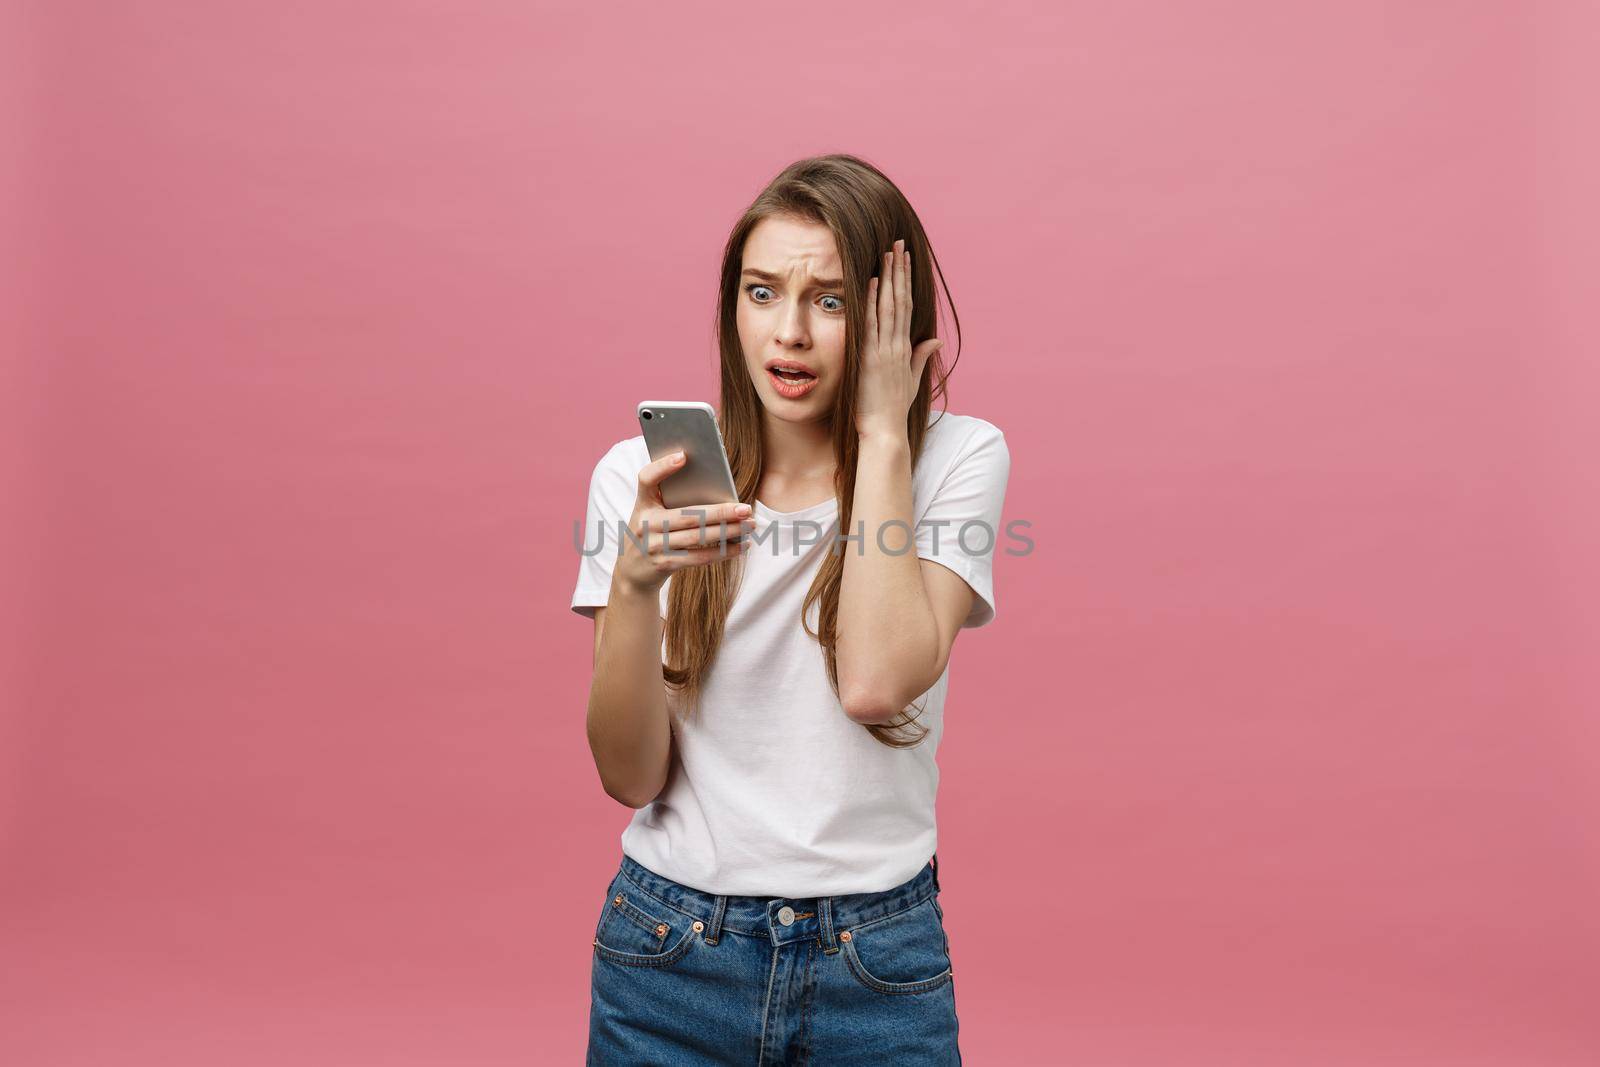 Serious young woman talking on phone isolated on pink. Copy space and fashion. Mock up